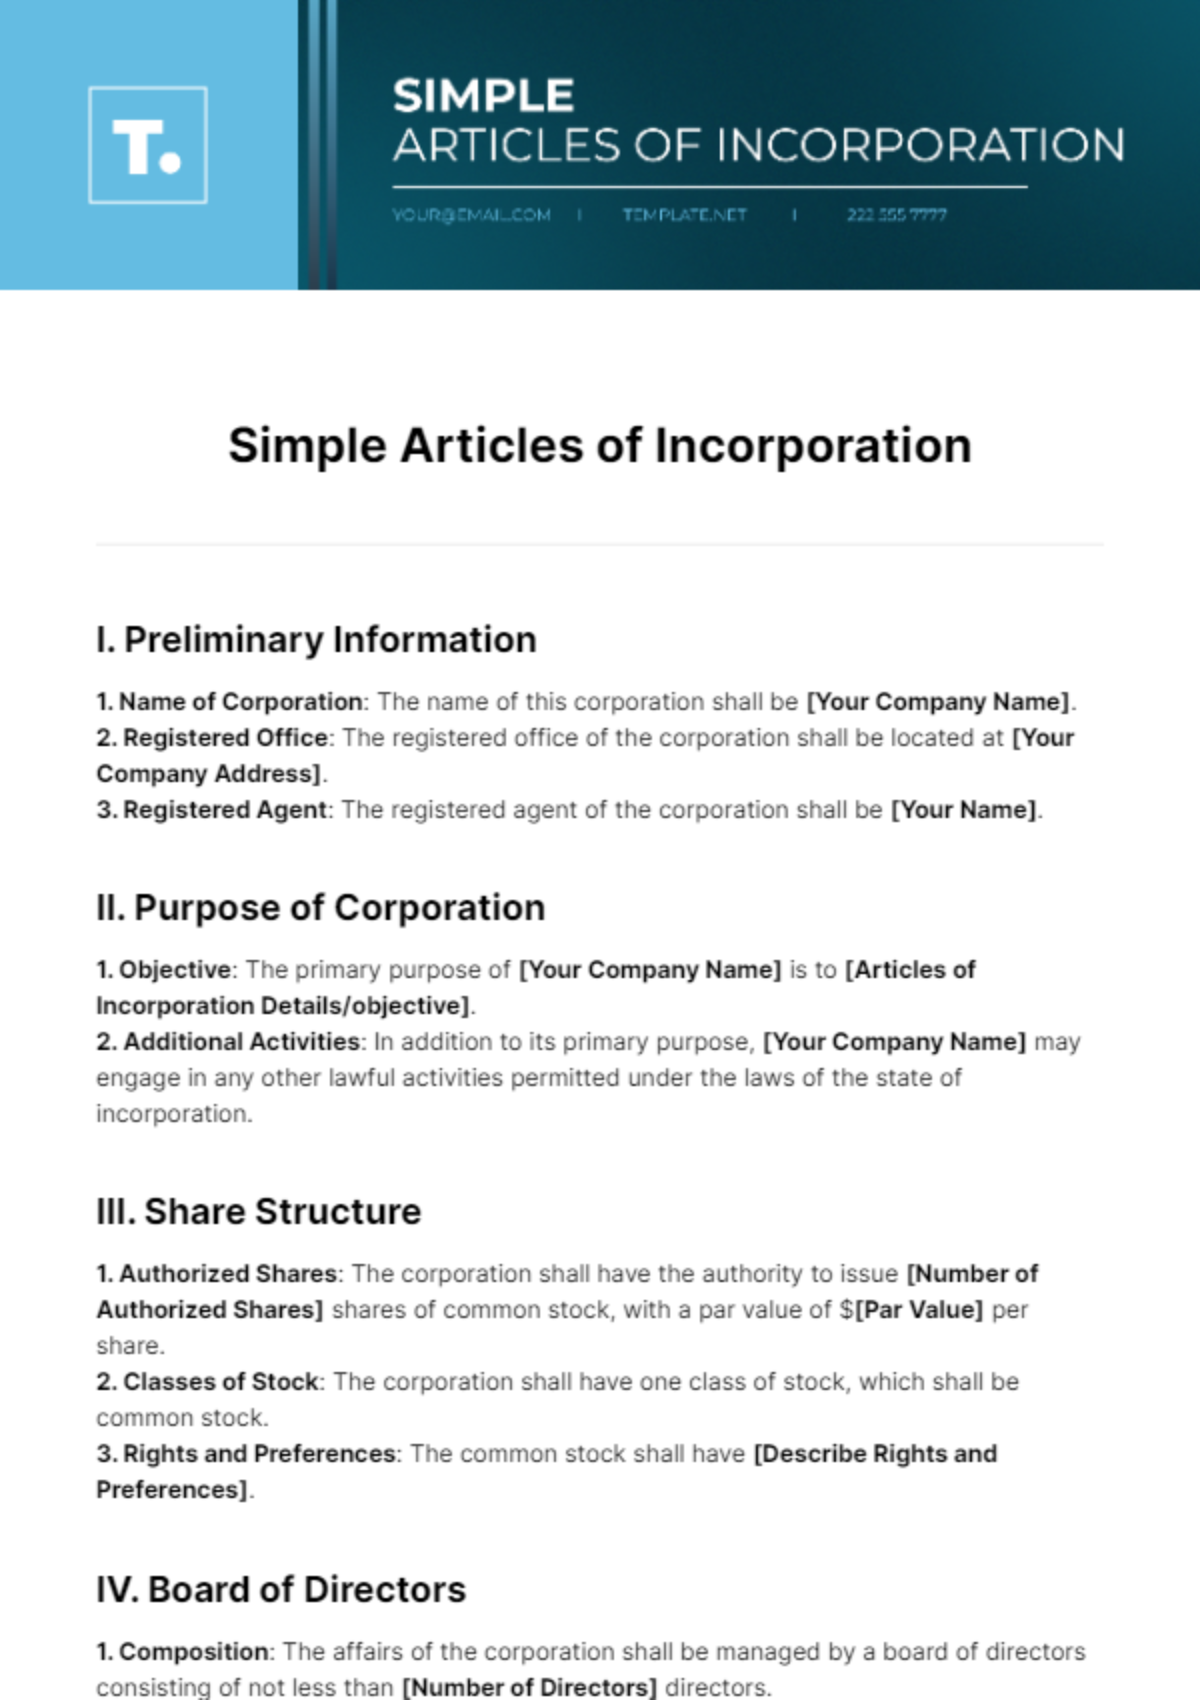 Simple Articles of Incorporation Template